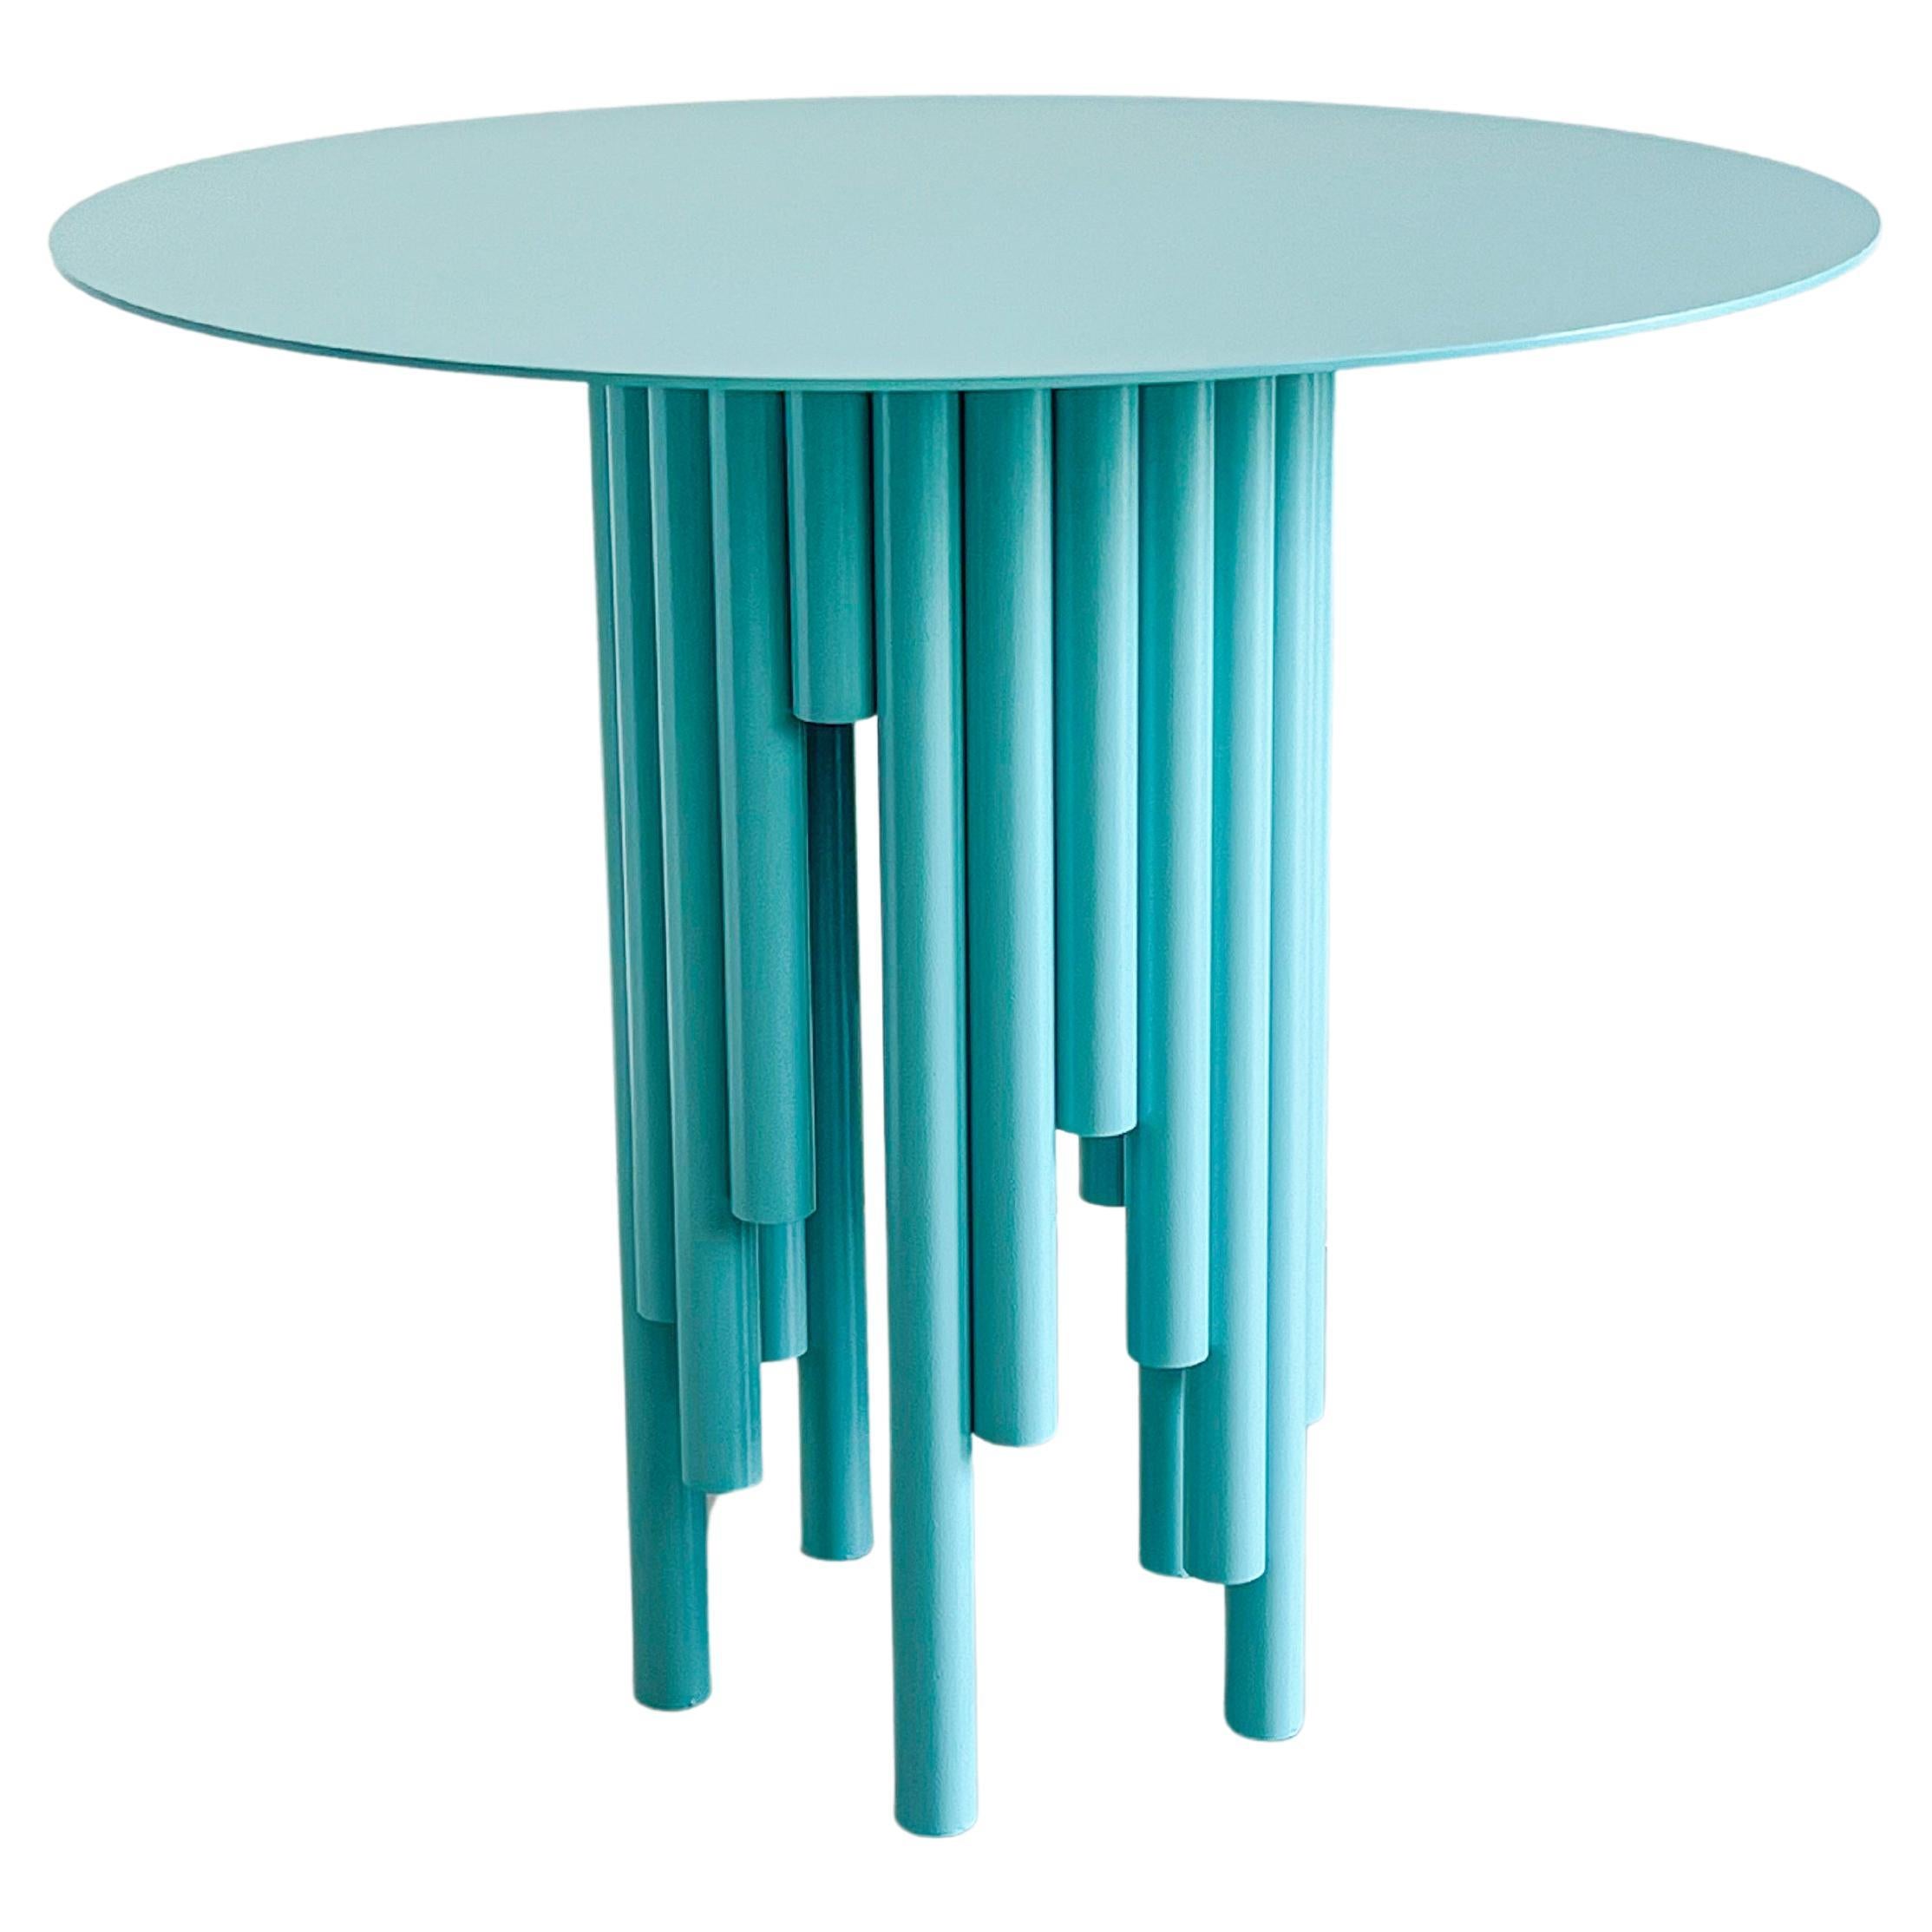 Round Dining Table / Kitchen Table / Tea Table / Entryway Table in Tiffany Blue